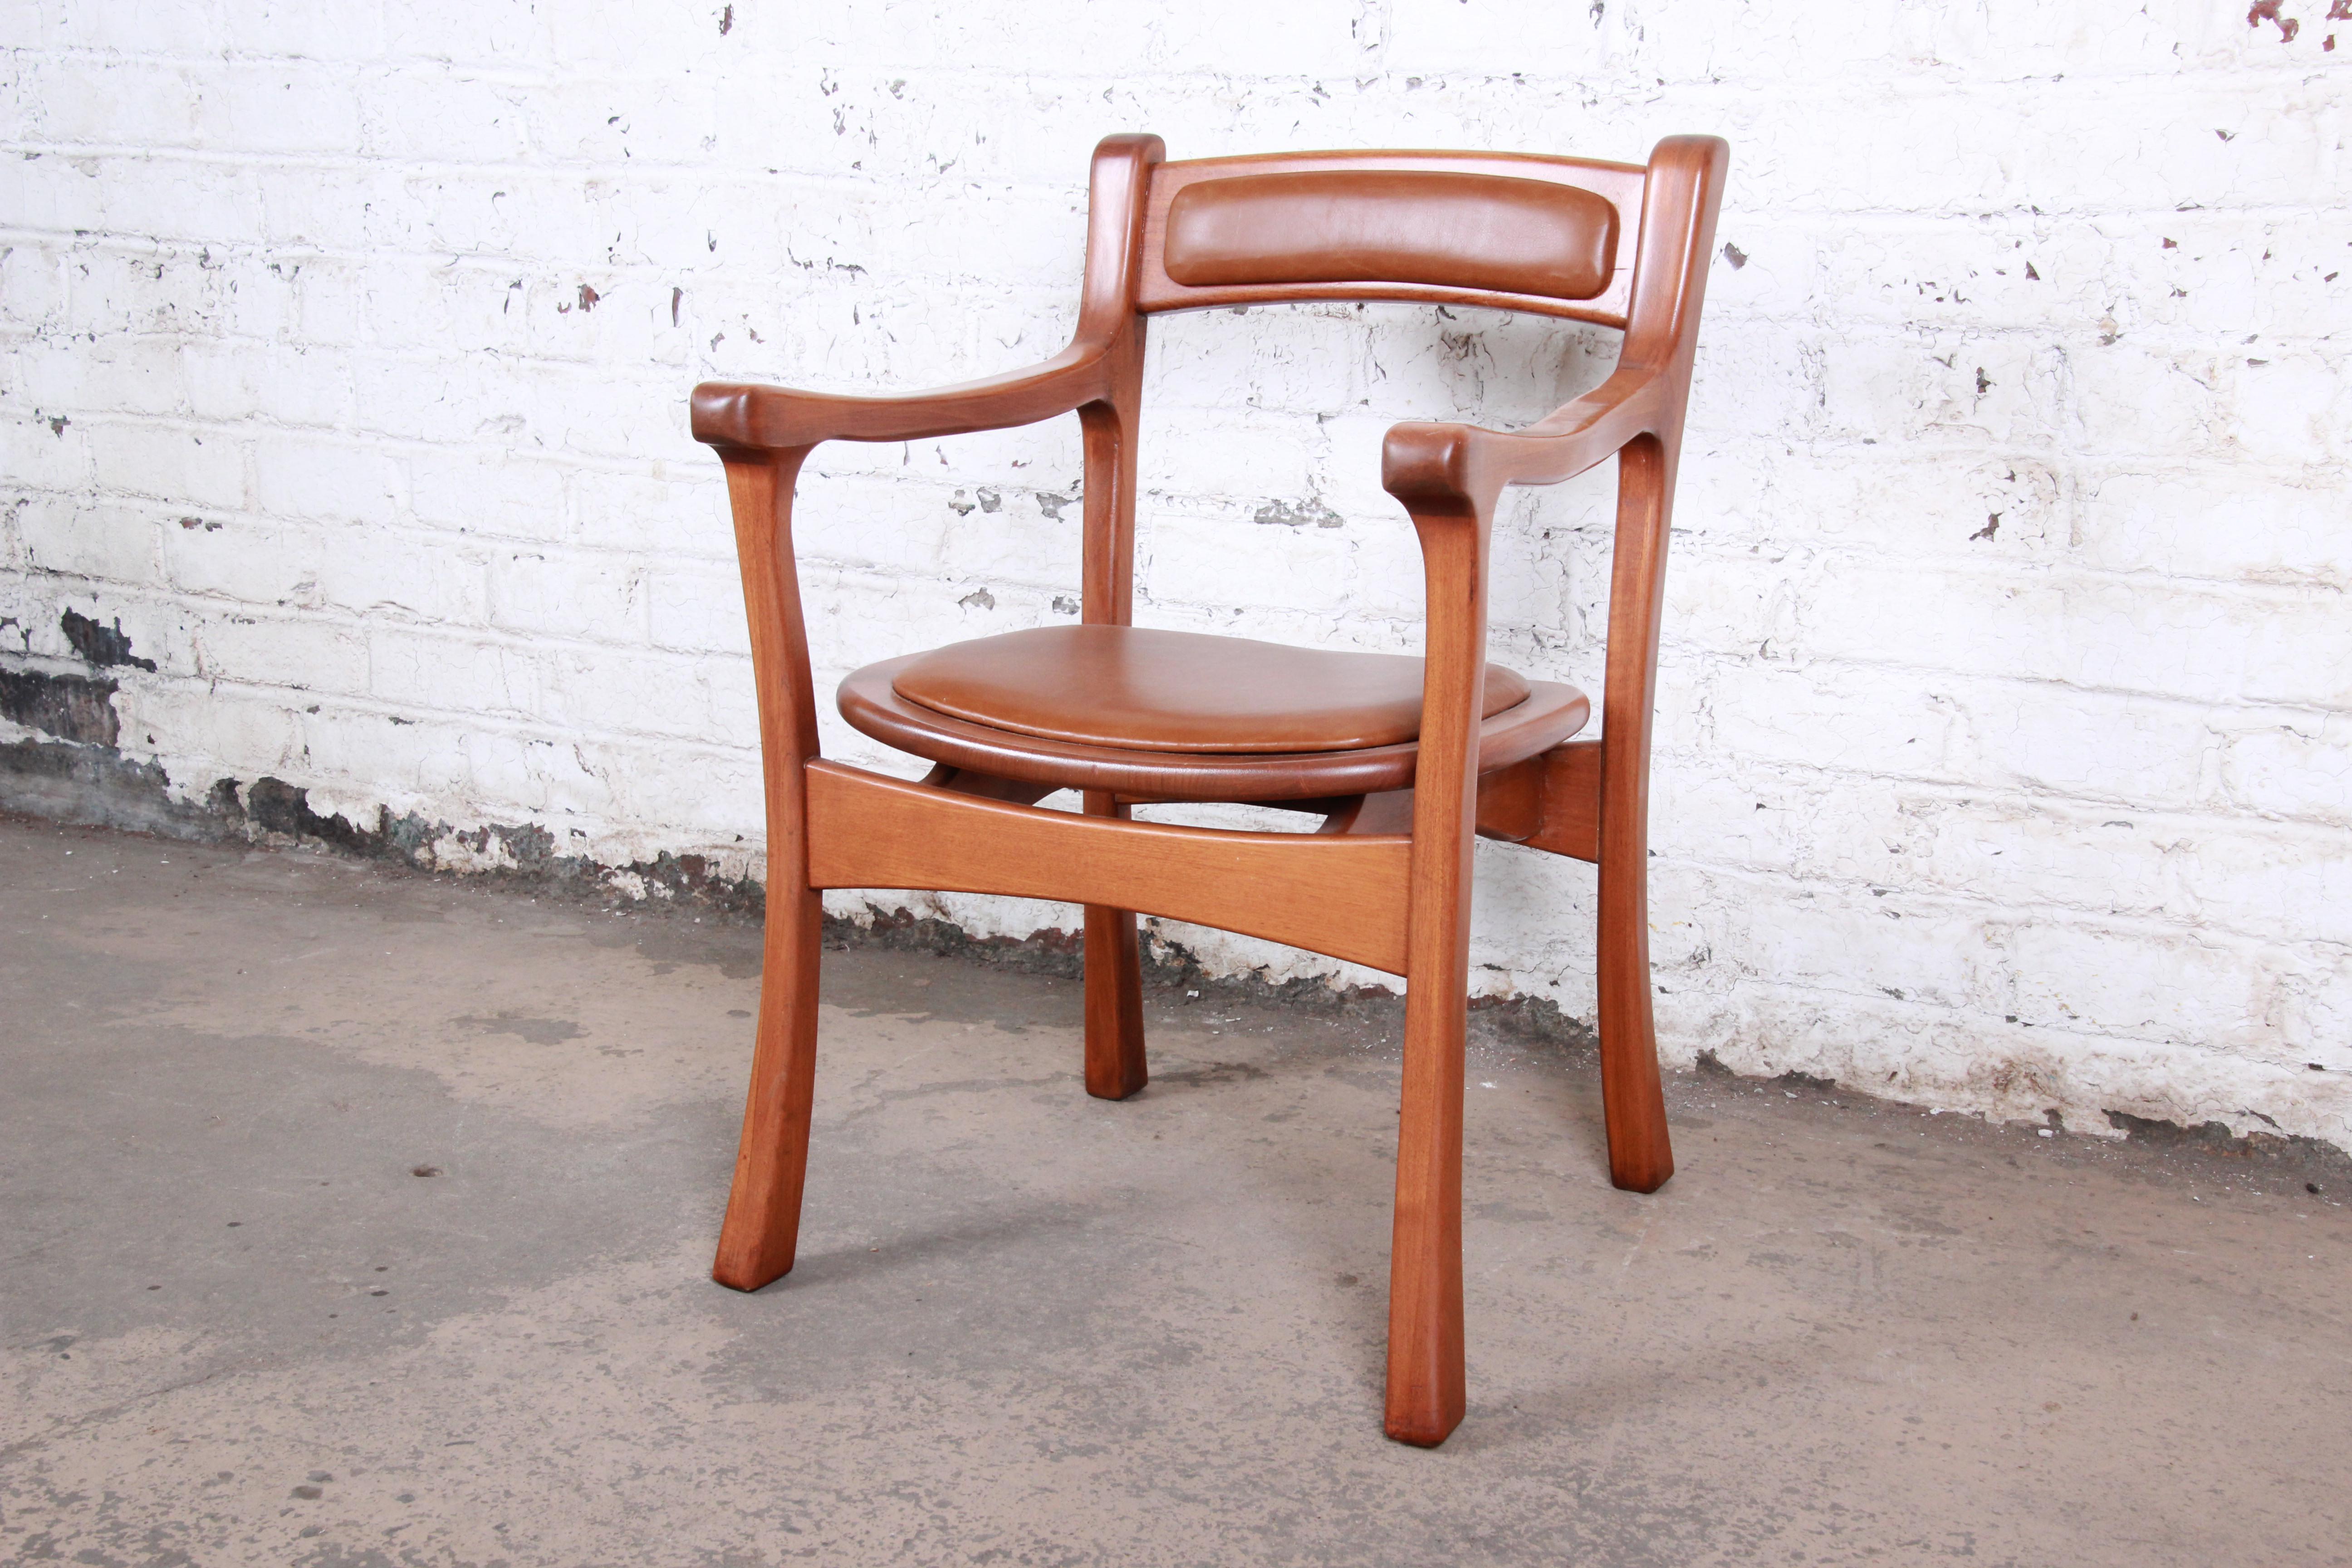 Sculpted Solid Teak and Leather Studio Crafted Club Chairs, circa 1960s For Sale 5